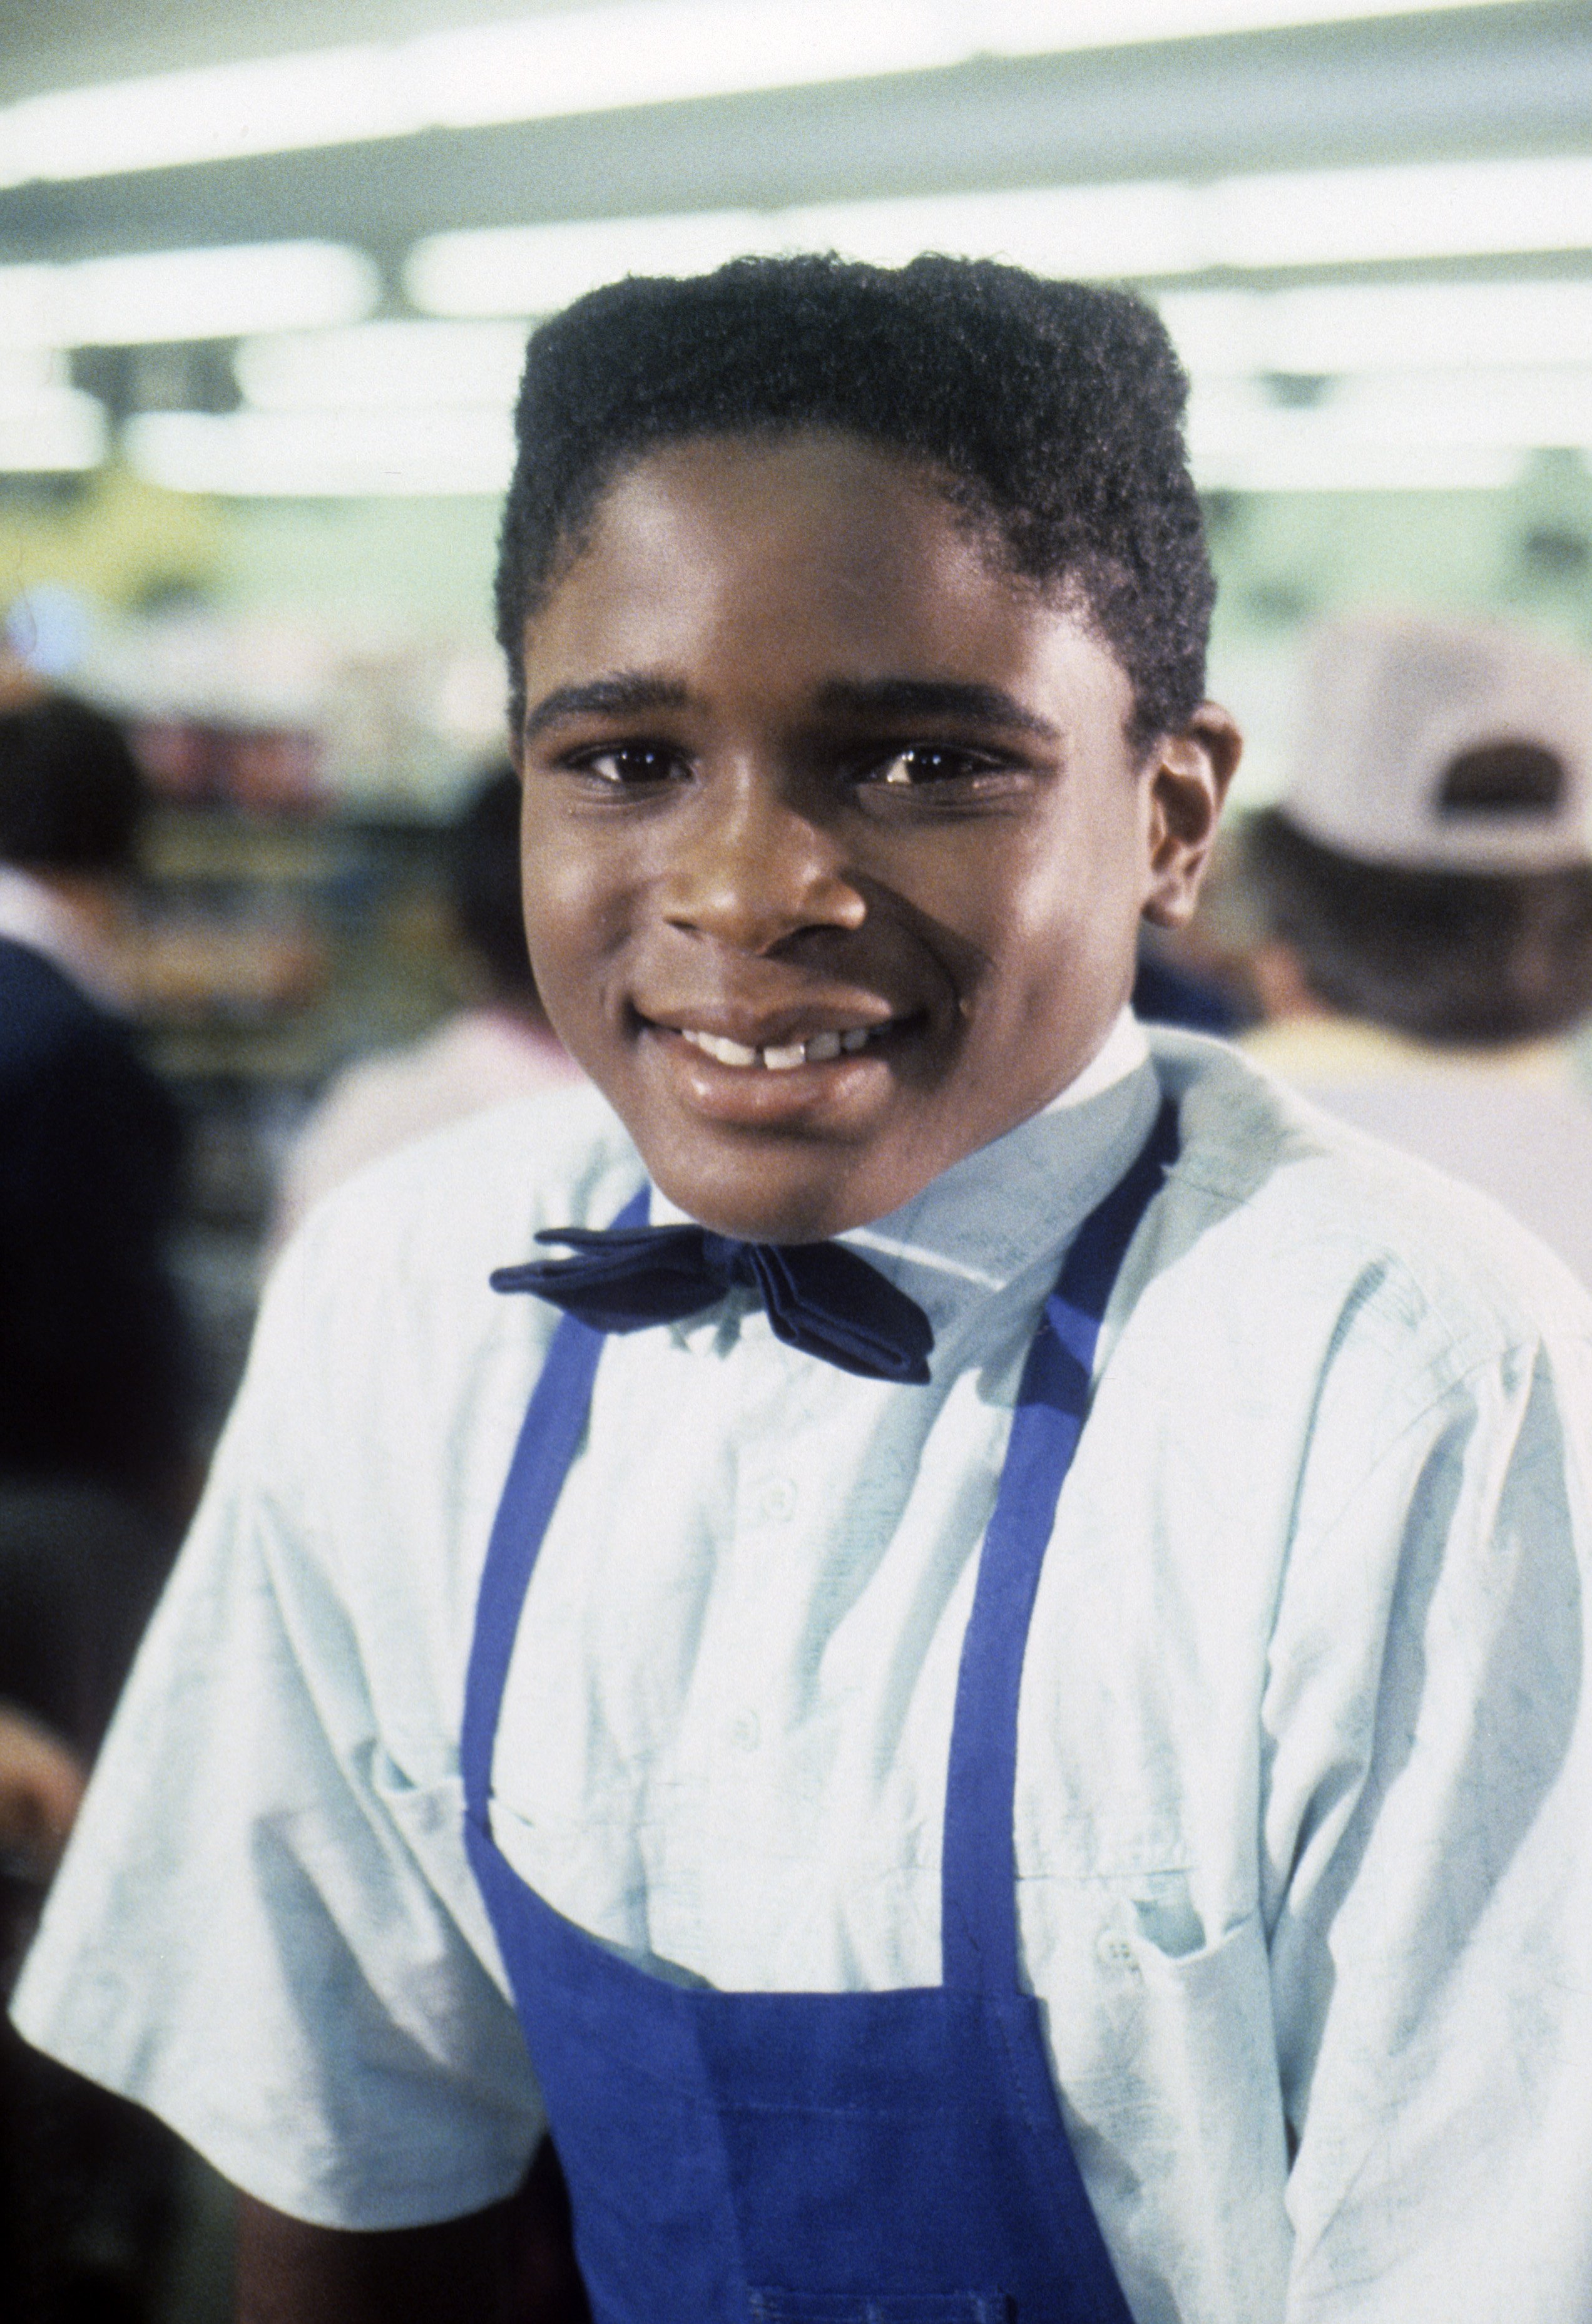 Darius McCrary on the set of "Family Matters" pilot episode on September 22nd, 1989 | Photo: Getty Images